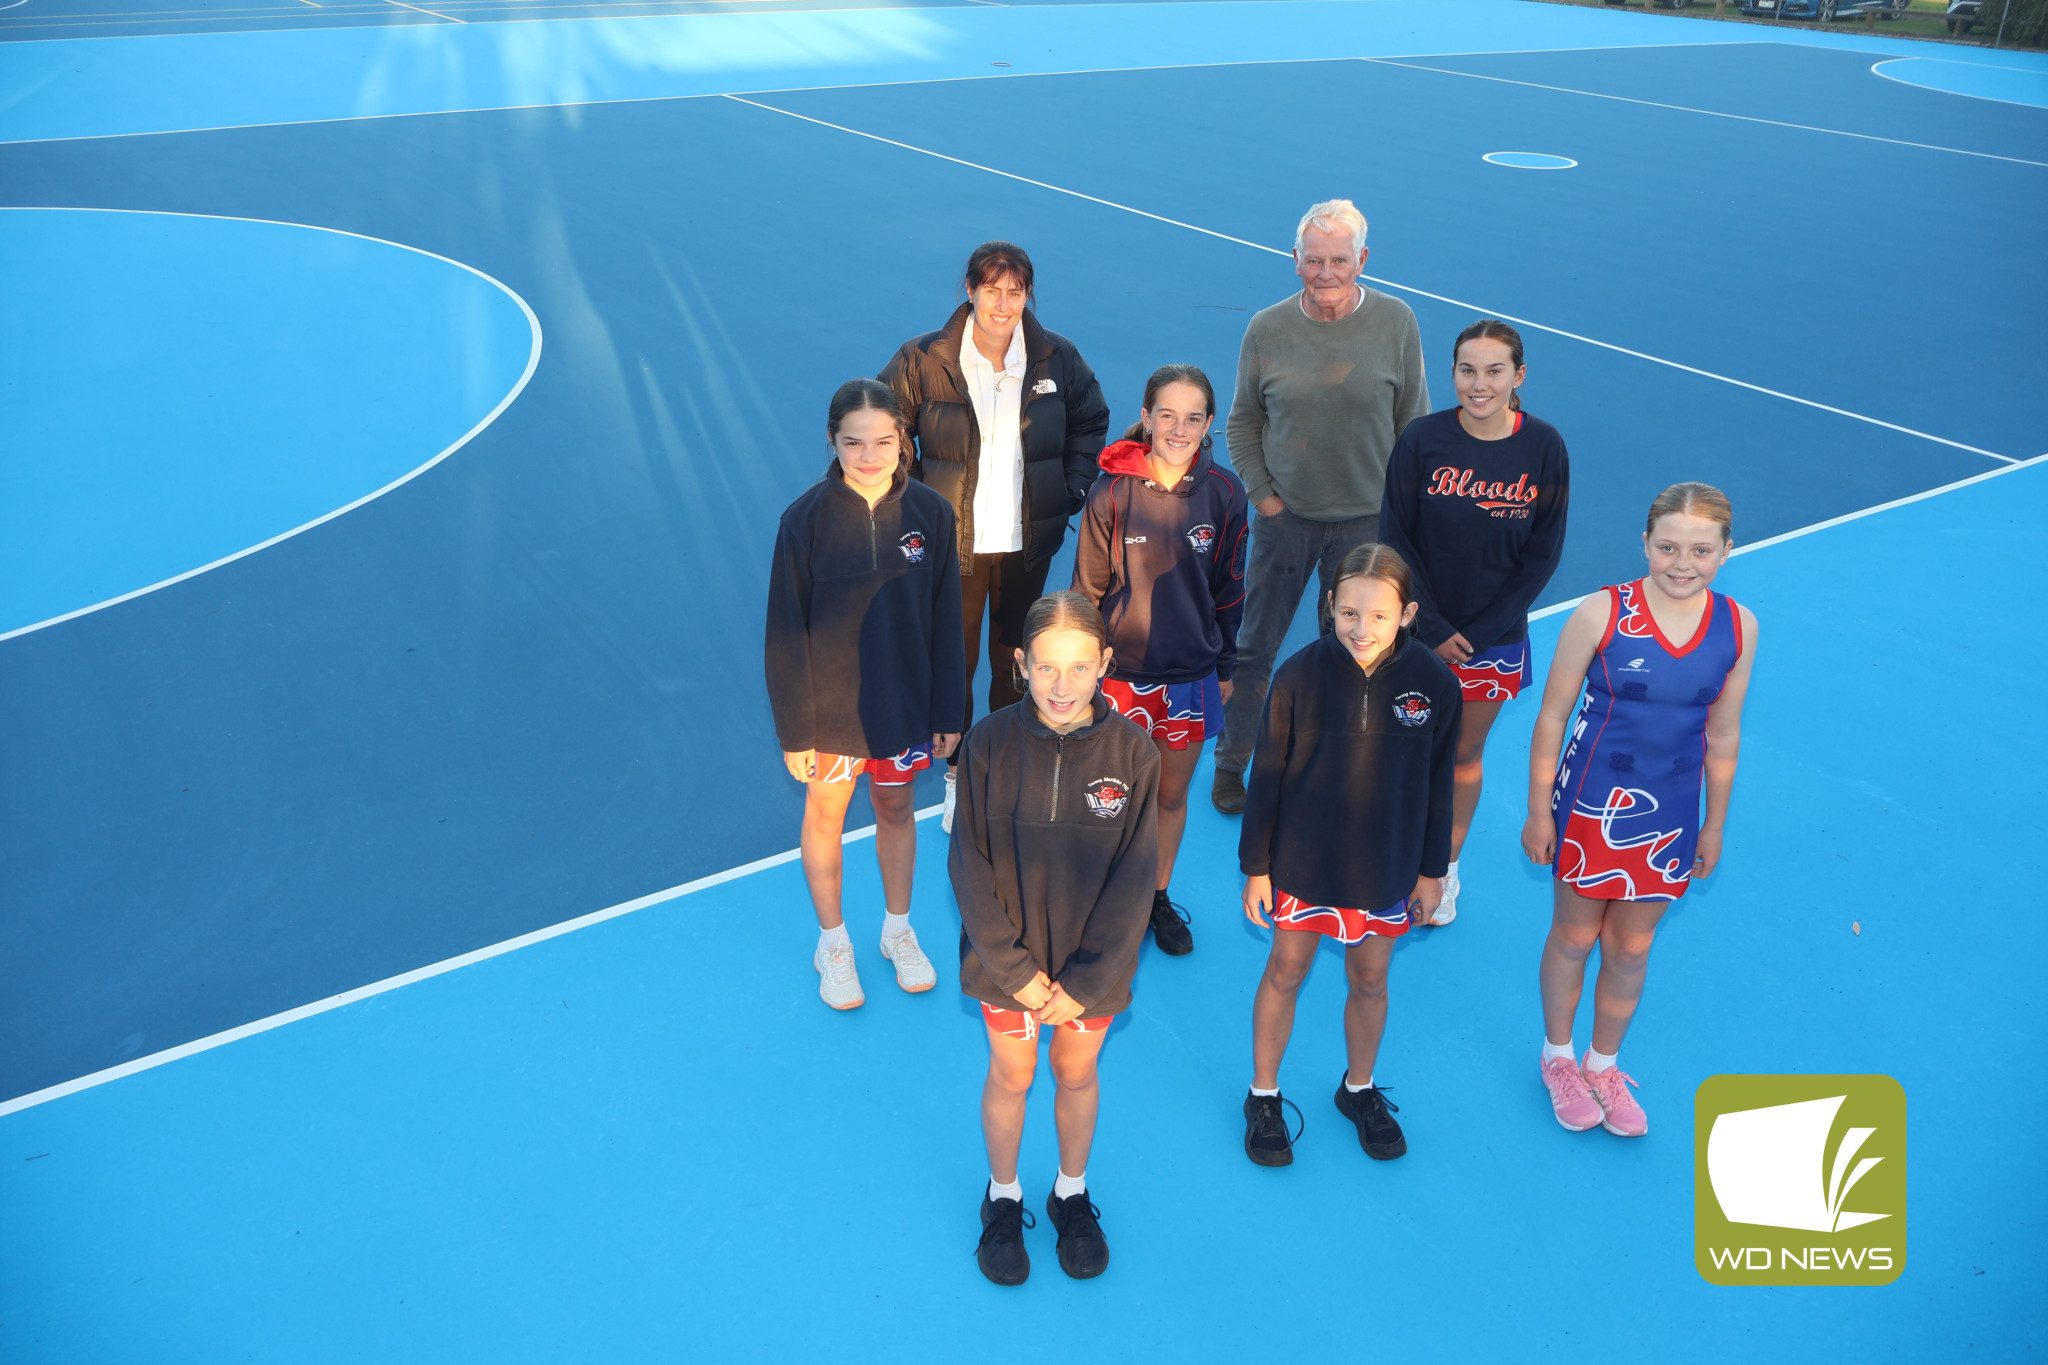 Goal ticked off: The Terang-Mortlake Bloods are ready to make their debut on the new home courts at Mortlake’s DC Farran Oval this weekend thanks to a $70,000 investment.